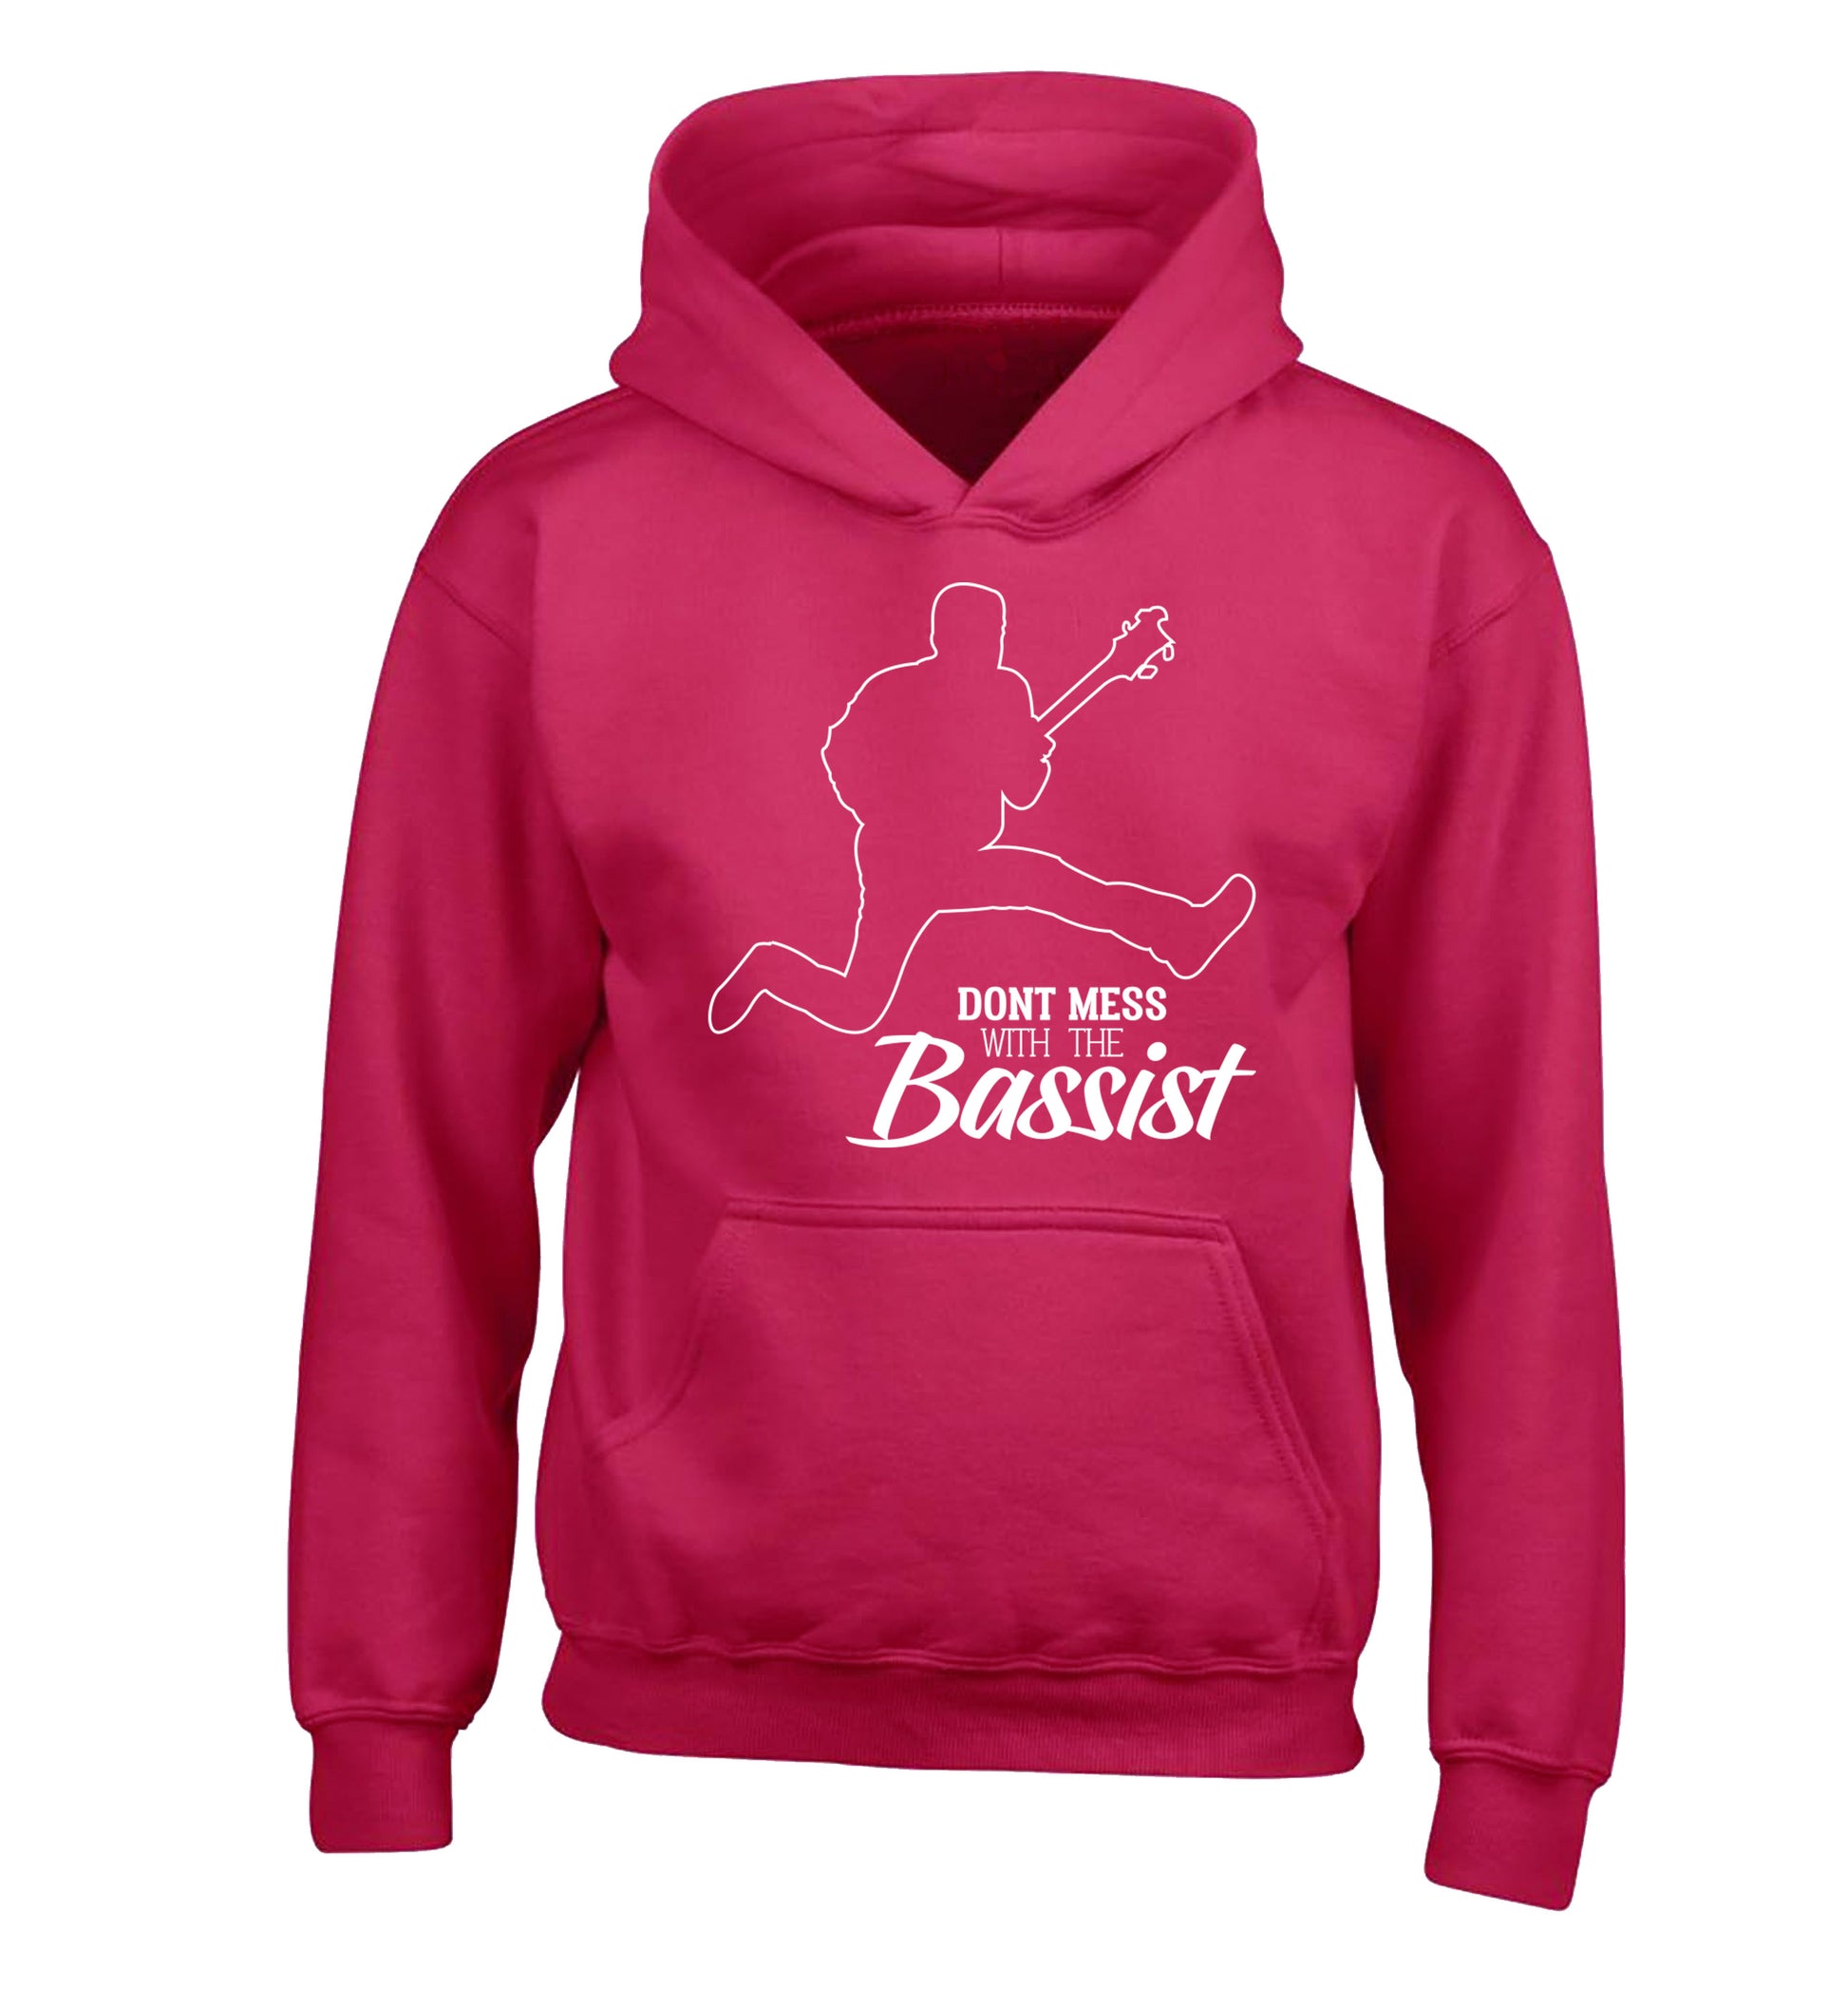 Dont mess with the bassist children's pink hoodie 12-13 Years